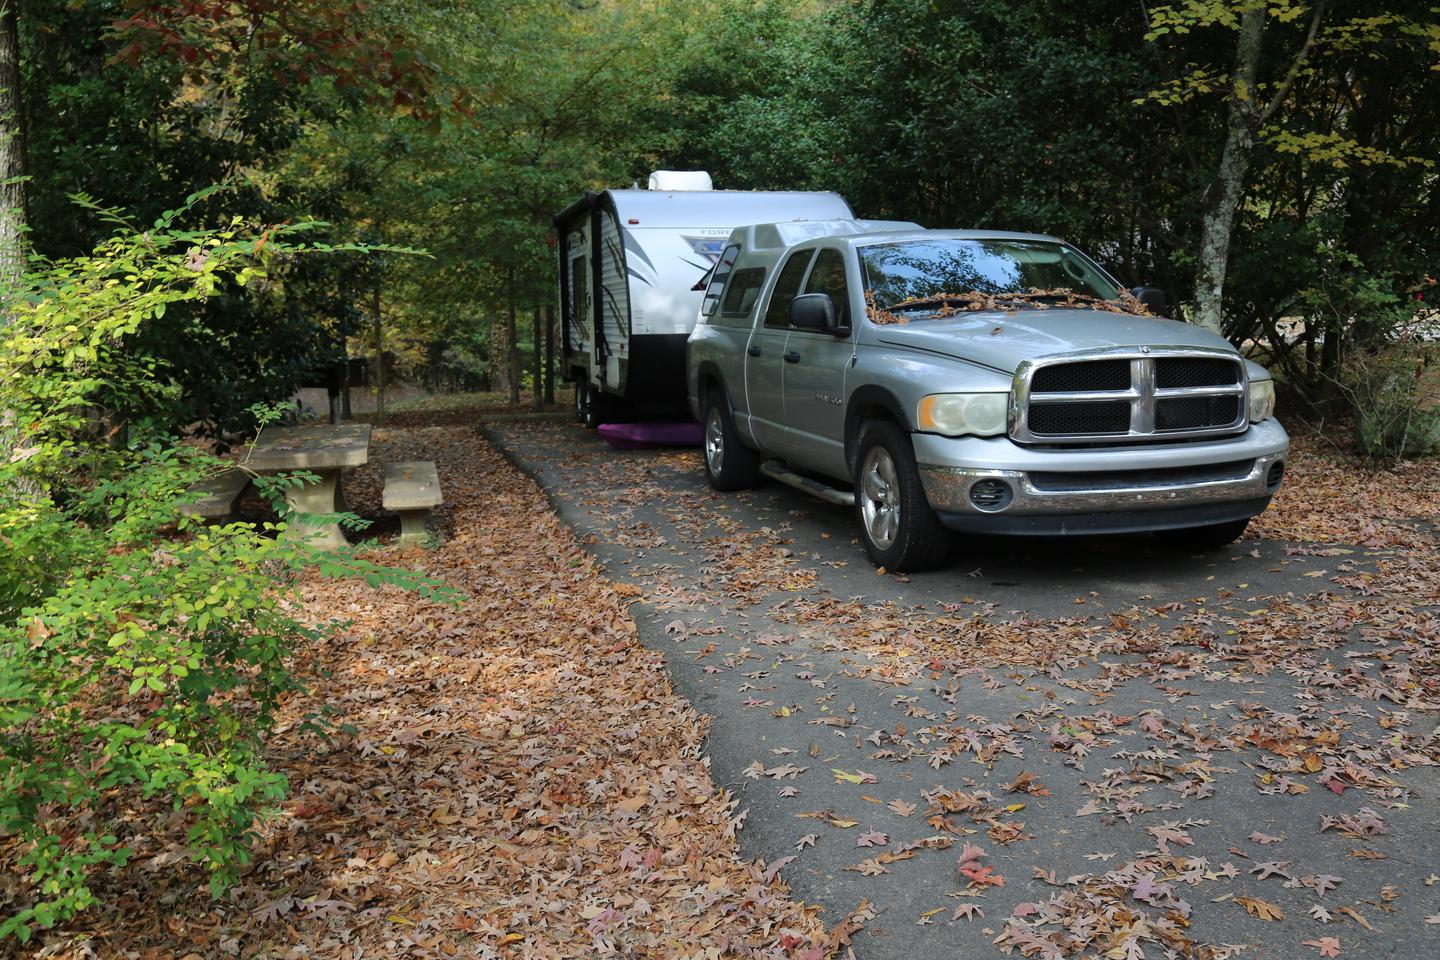 Camper with pickup truck on paved campsite beside a picnic table surrounded by trees and fallen leavesCampsite 20